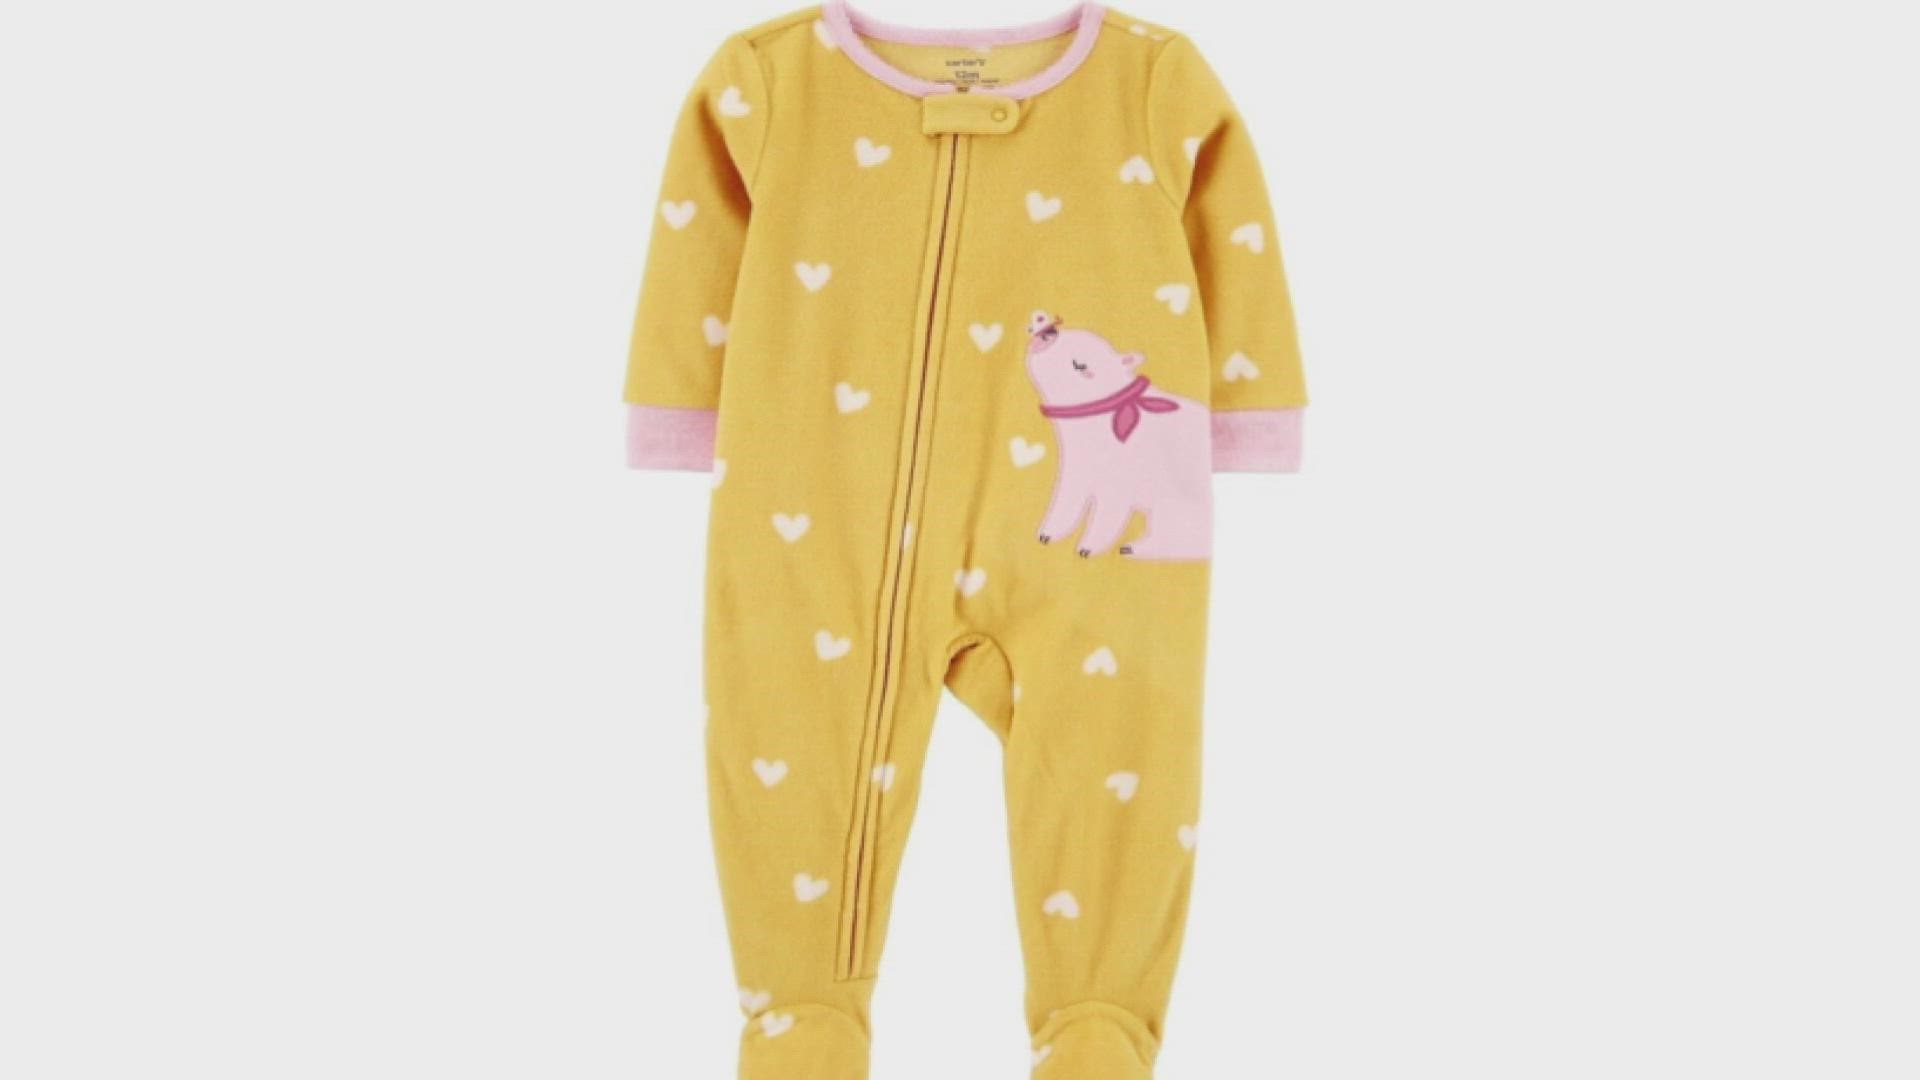 The footed pajamas could have pieces of wire in them that could cut a baby.